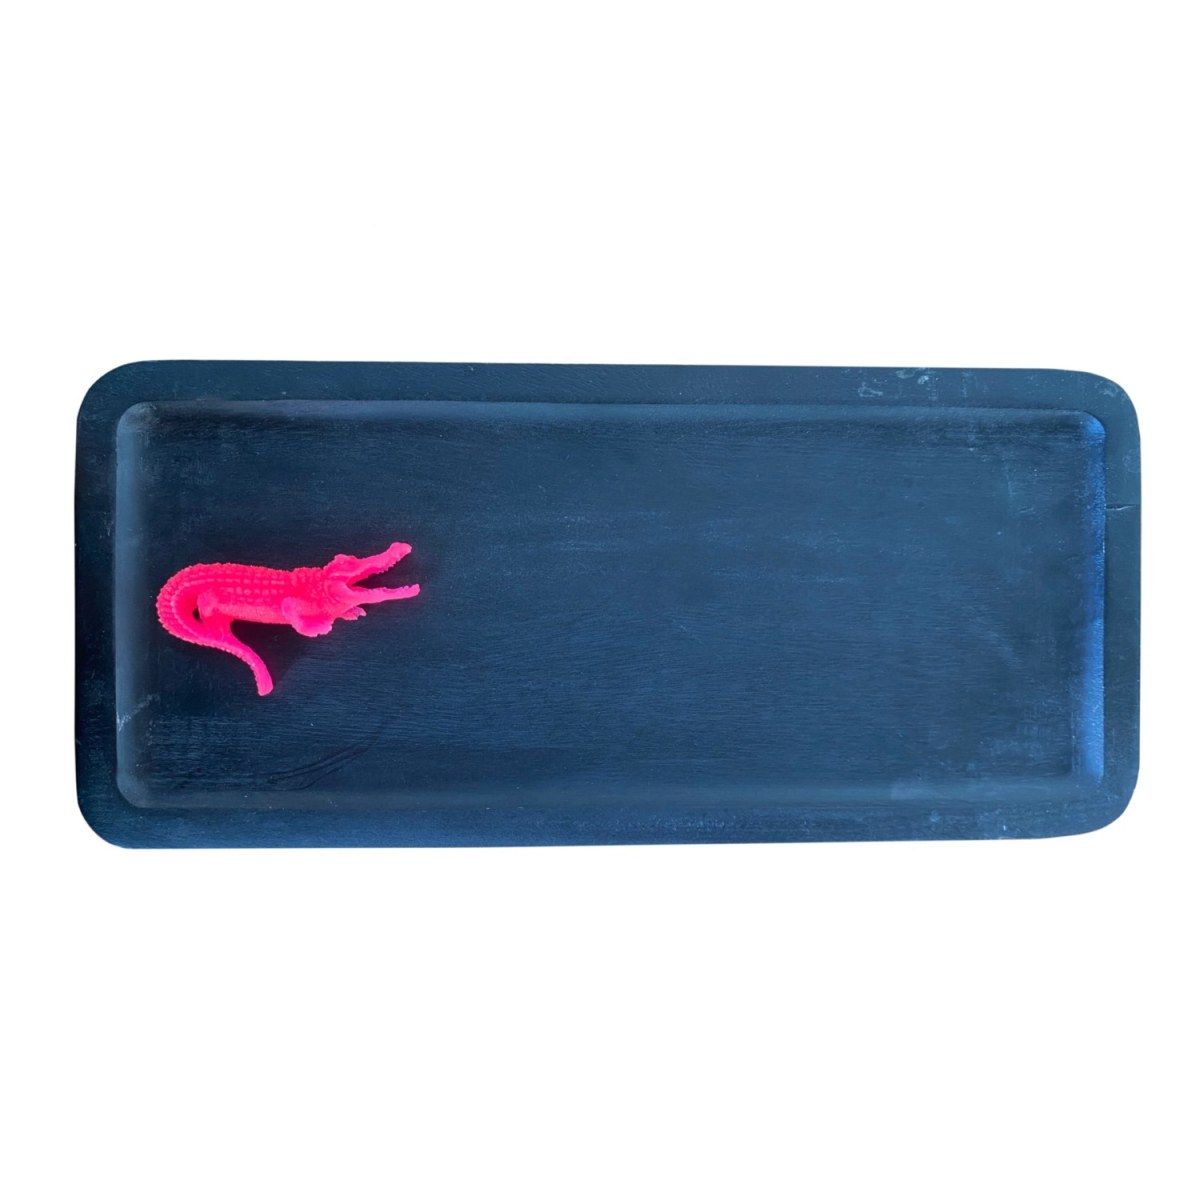 Wooden Tray Black With Neon Pink Crocodile | Wolf & Badger (US)